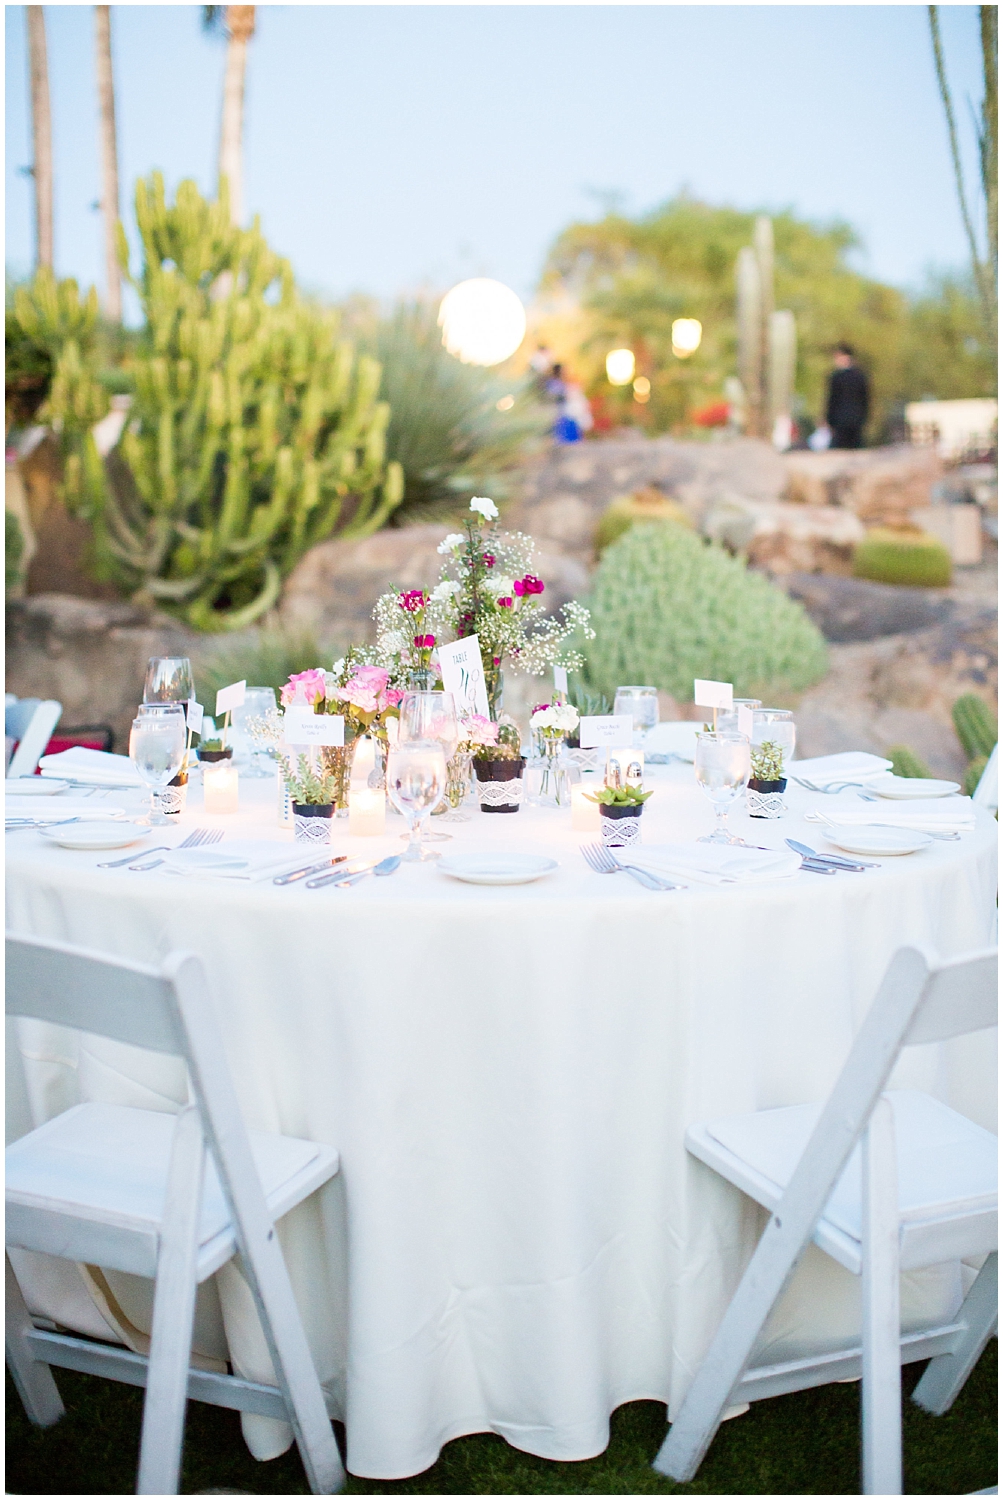 reception table with white linens and chairs with flowers